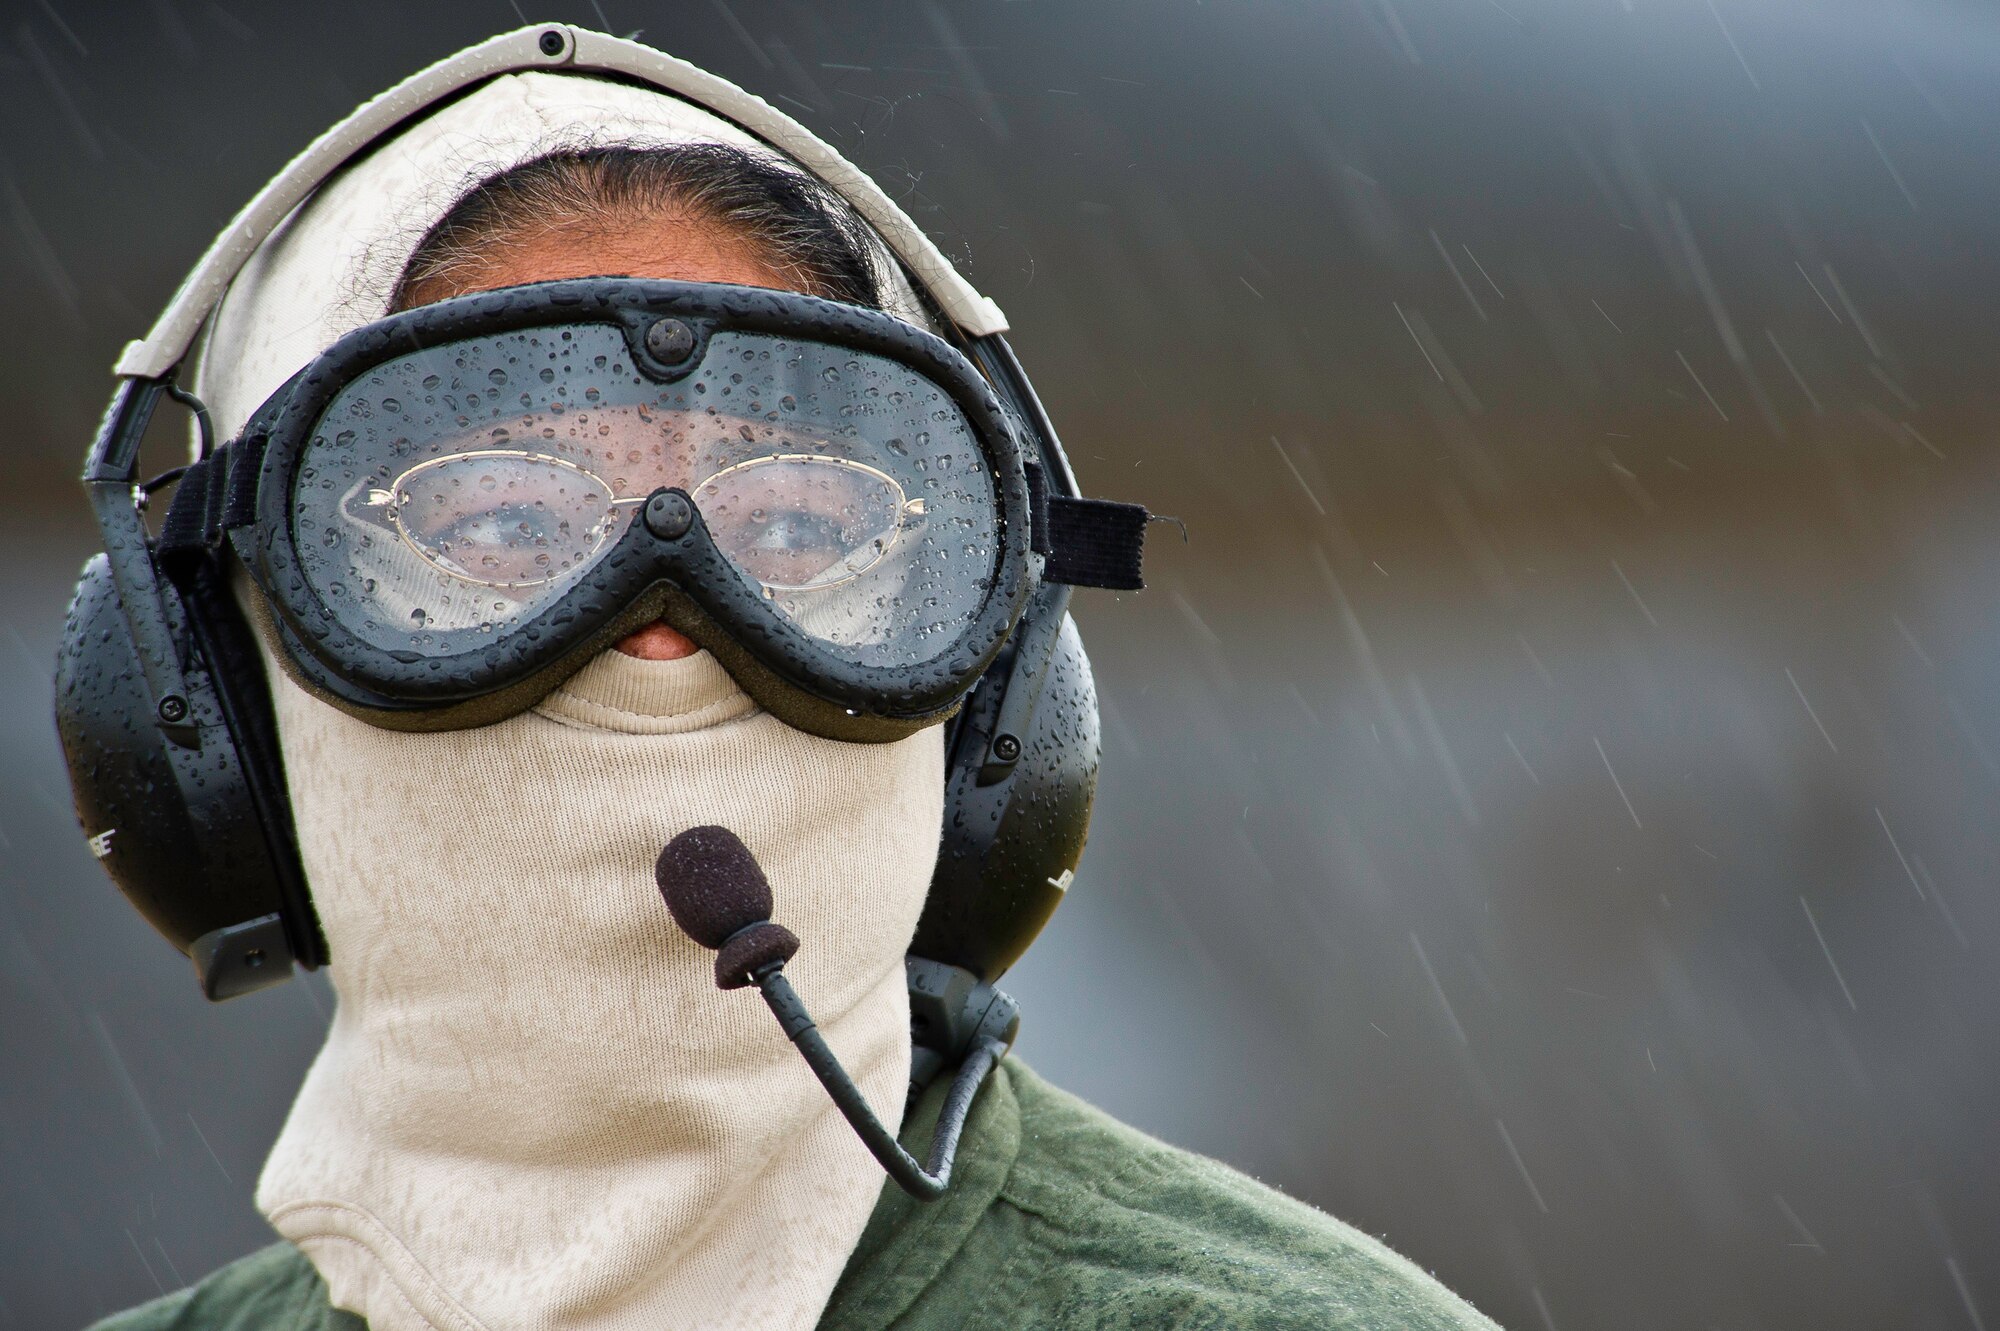 U.S. Air Force Capt. Tracy Tucker, a flight nurse with the 433rd Aeromedical Evacuation Squadron, Joint Base San Antonio-Lackland, Texas, works in the rain as a safety spotter during Warrior Exercise 86-13-01 (WAREX)/Exercise Global Medic, 2013, at Fort McCoy, Wis. July 27, 2013. The WAREX provides units an opportunity to rehearse military maneuvers and tactics. Held in conjunction with WAREX, Global Medic is an annual joint-field training exercise designed to replicate all aspects of theater combat medical support. (U.S. Air Force photo/Tech. Sgt. Efren Lopez)